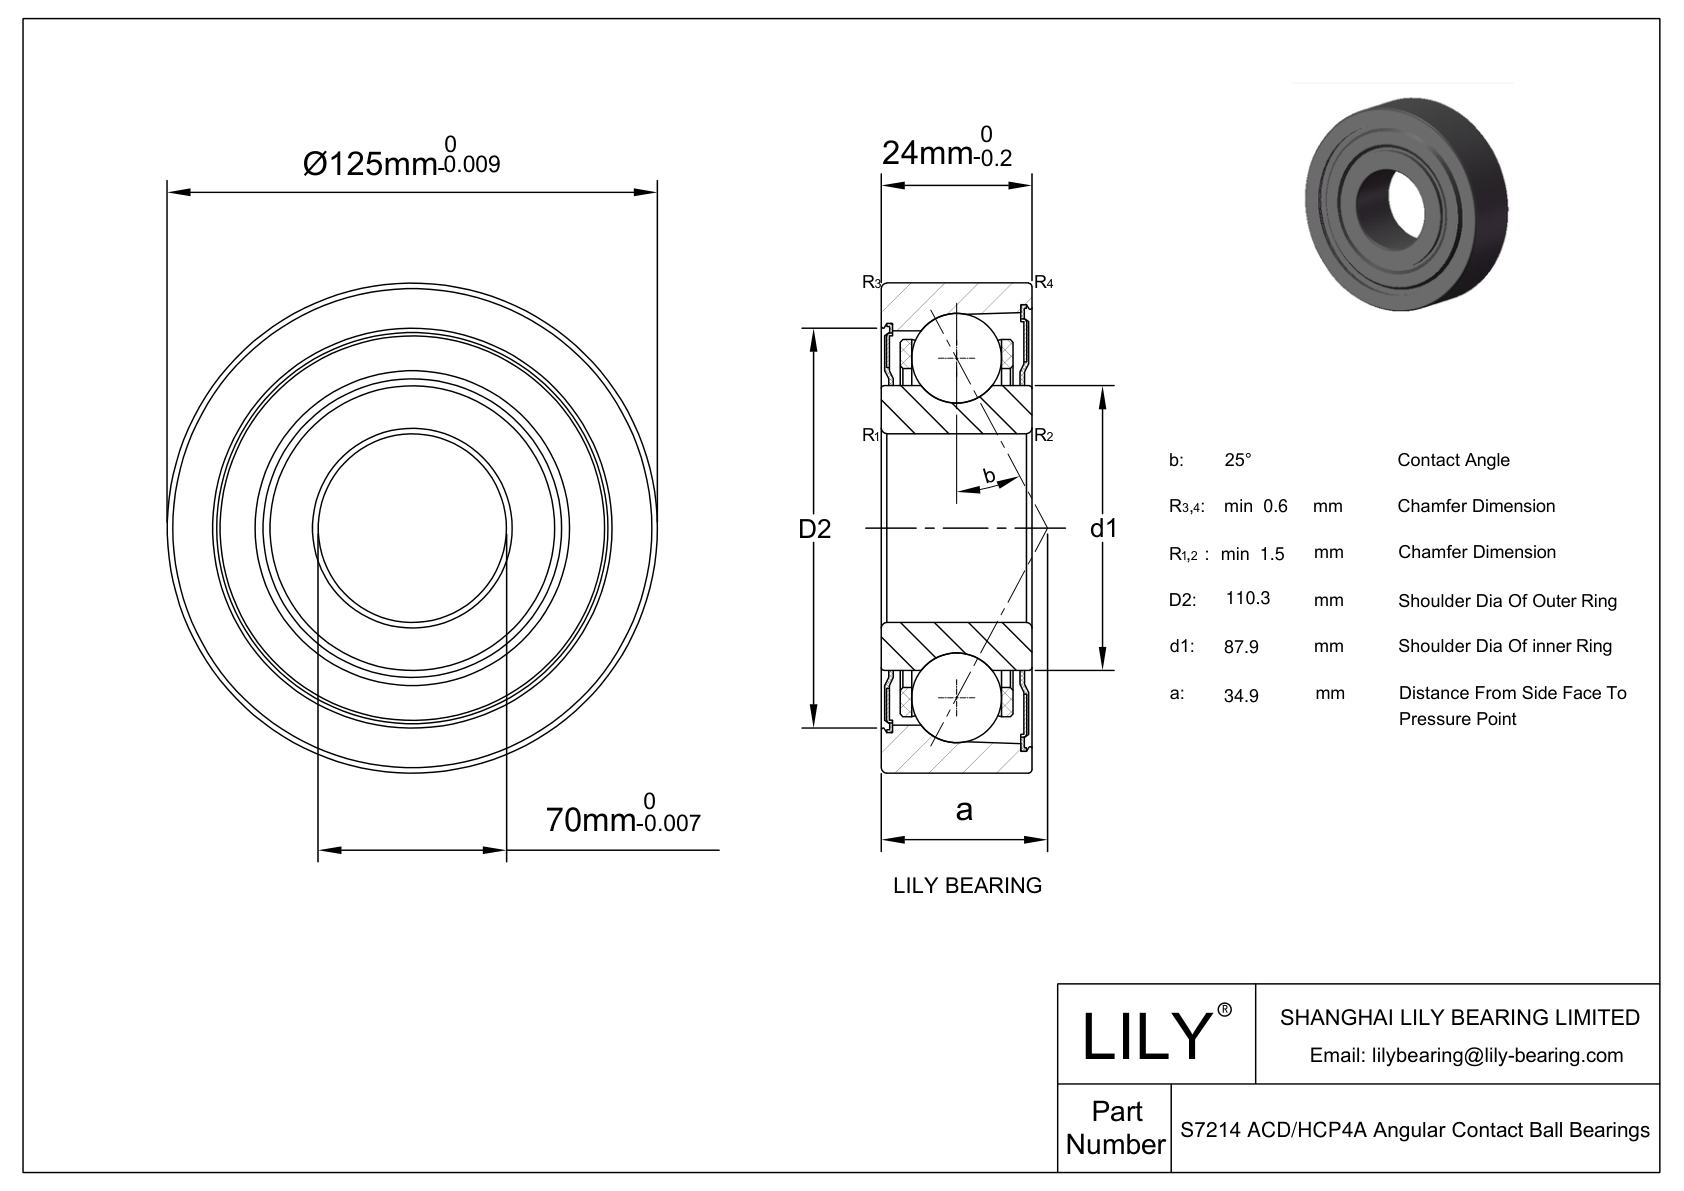 S7214 ACD/HCP4A Super Precision Angular Contact Ball Bearings cad drawing